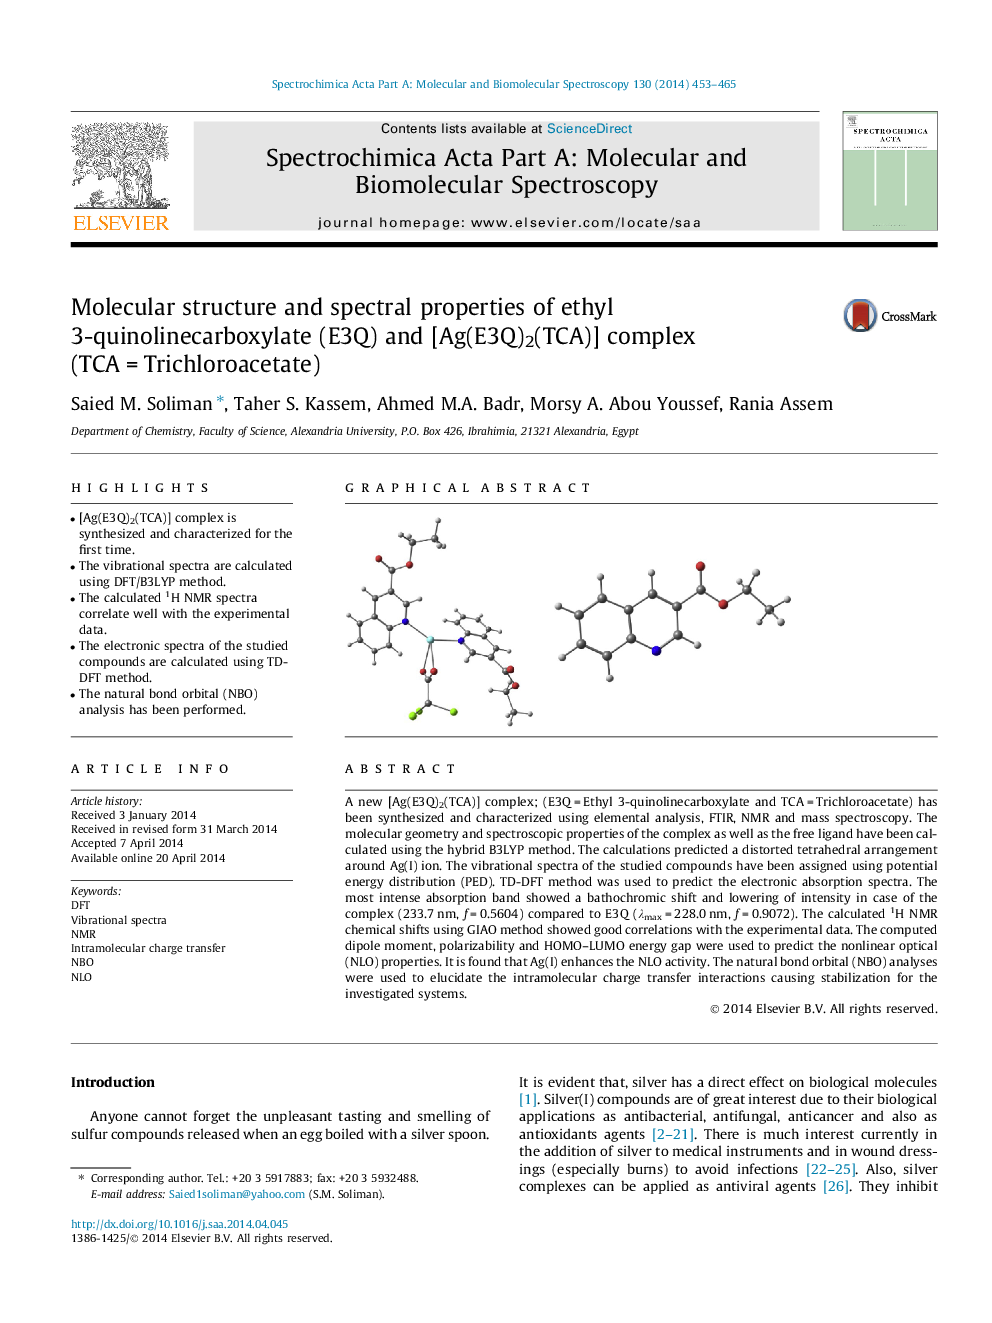 Molecular structure and spectral properties of ethyl 3-quinolinecarboxylate (E3Q) and [Ag(E3Q)2(TCA)] complex (TCAÂ =Â Trichloroacetate)